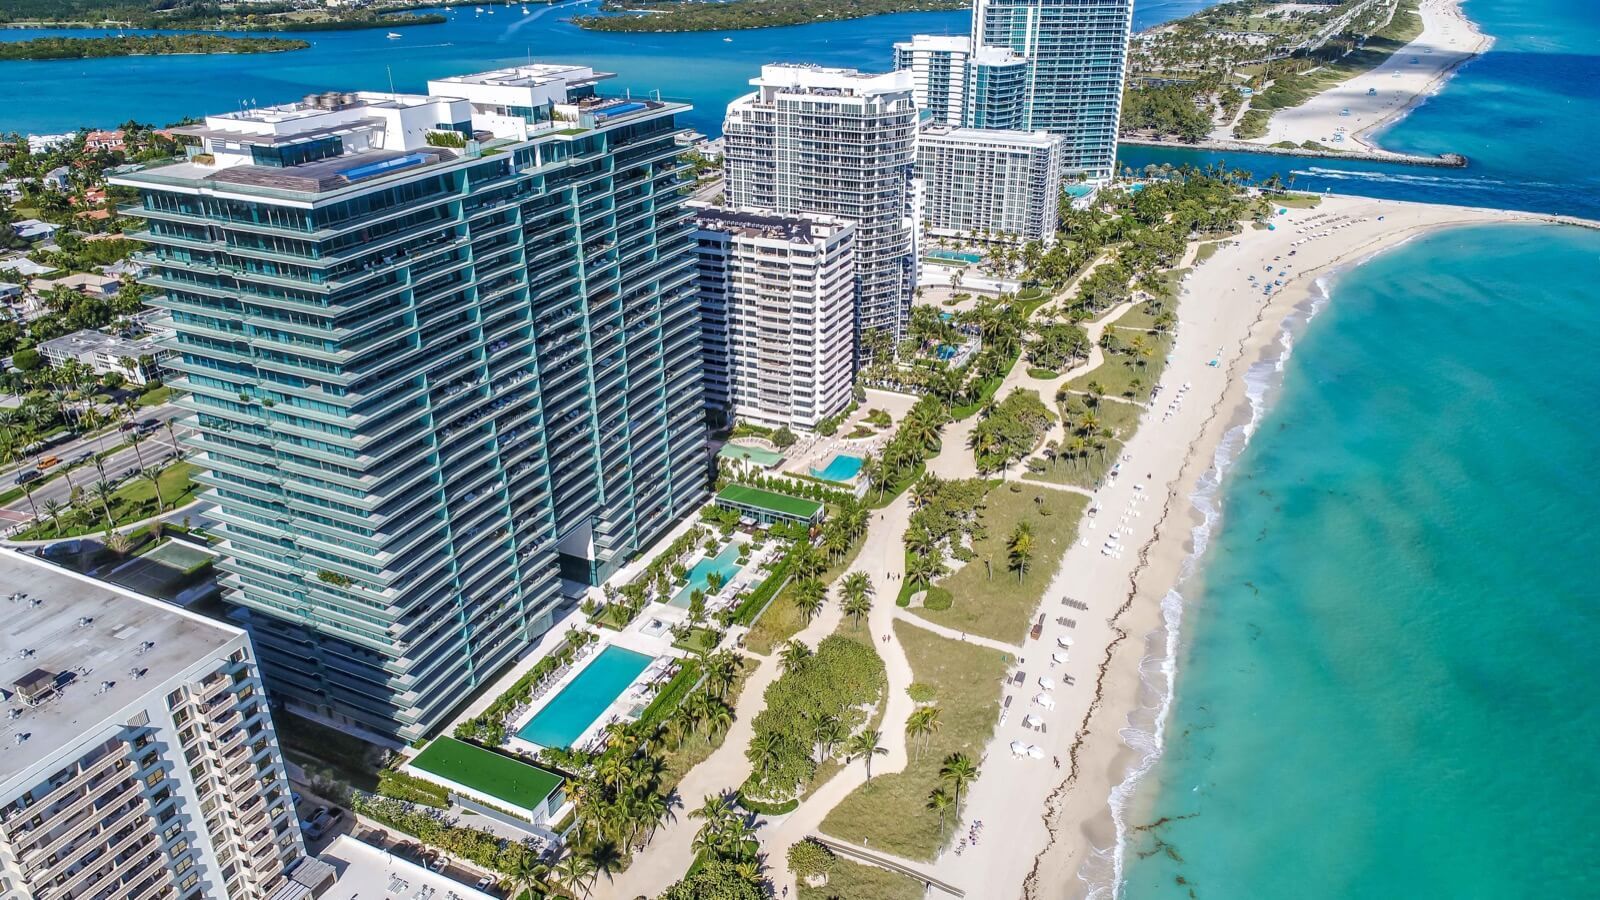 Oceana Bal Harbour Views From Above